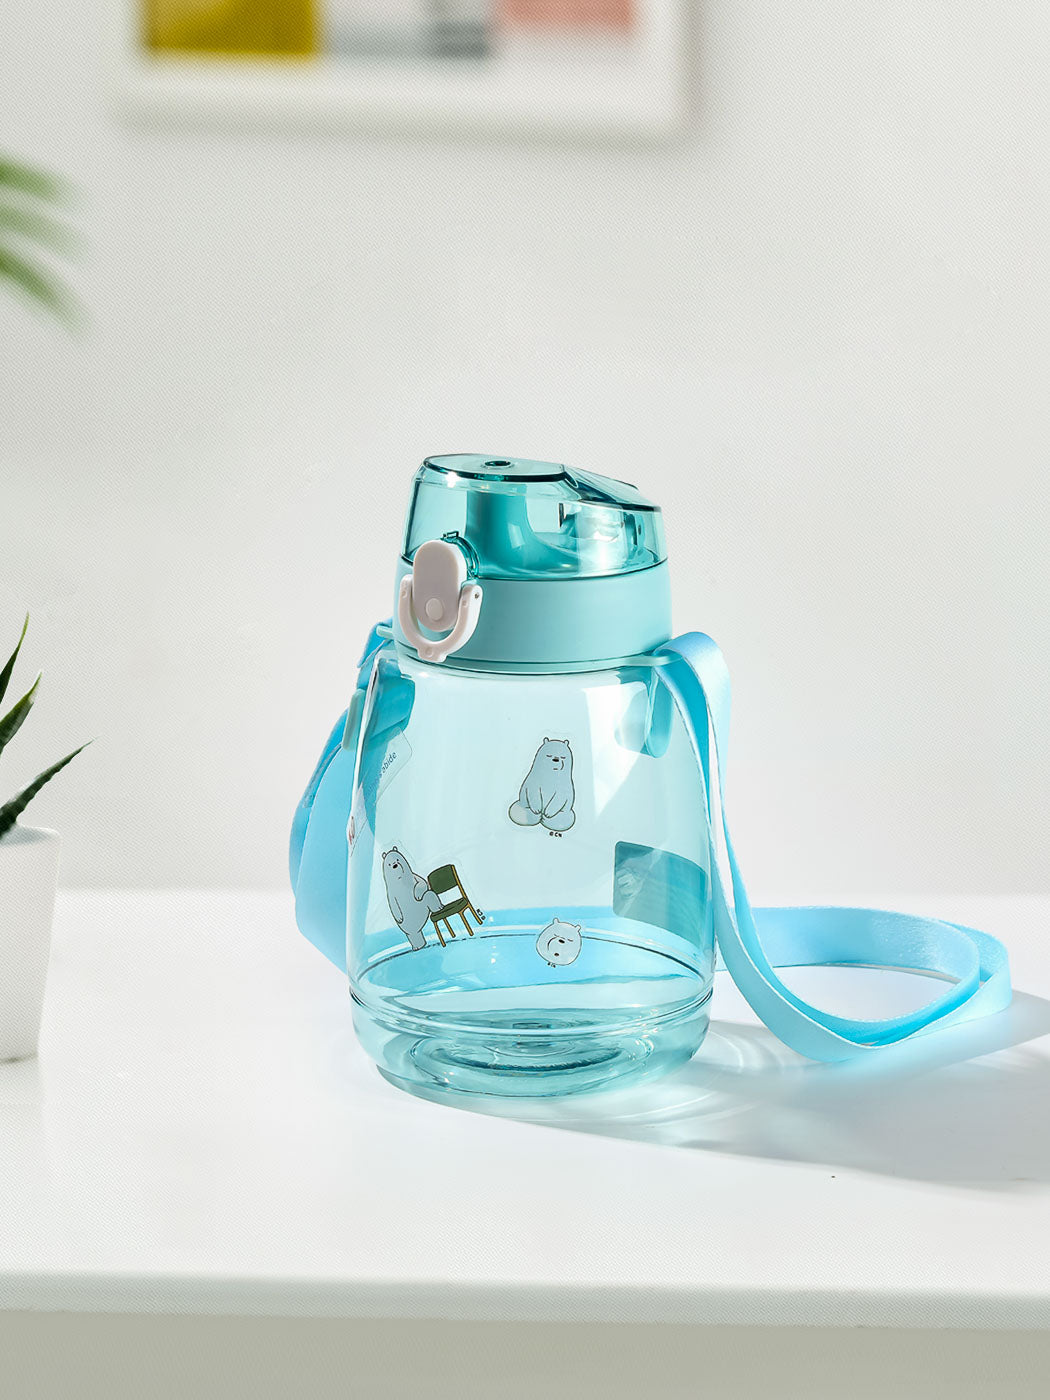 MINISO WE BARE BEARS COLLECTION 4.0 COOL WATER BOTTLE WITH SHOULDER STRAP - 1300ML (ICE BEAR) 2012257110102 PLASTIC WATER BOTTLE